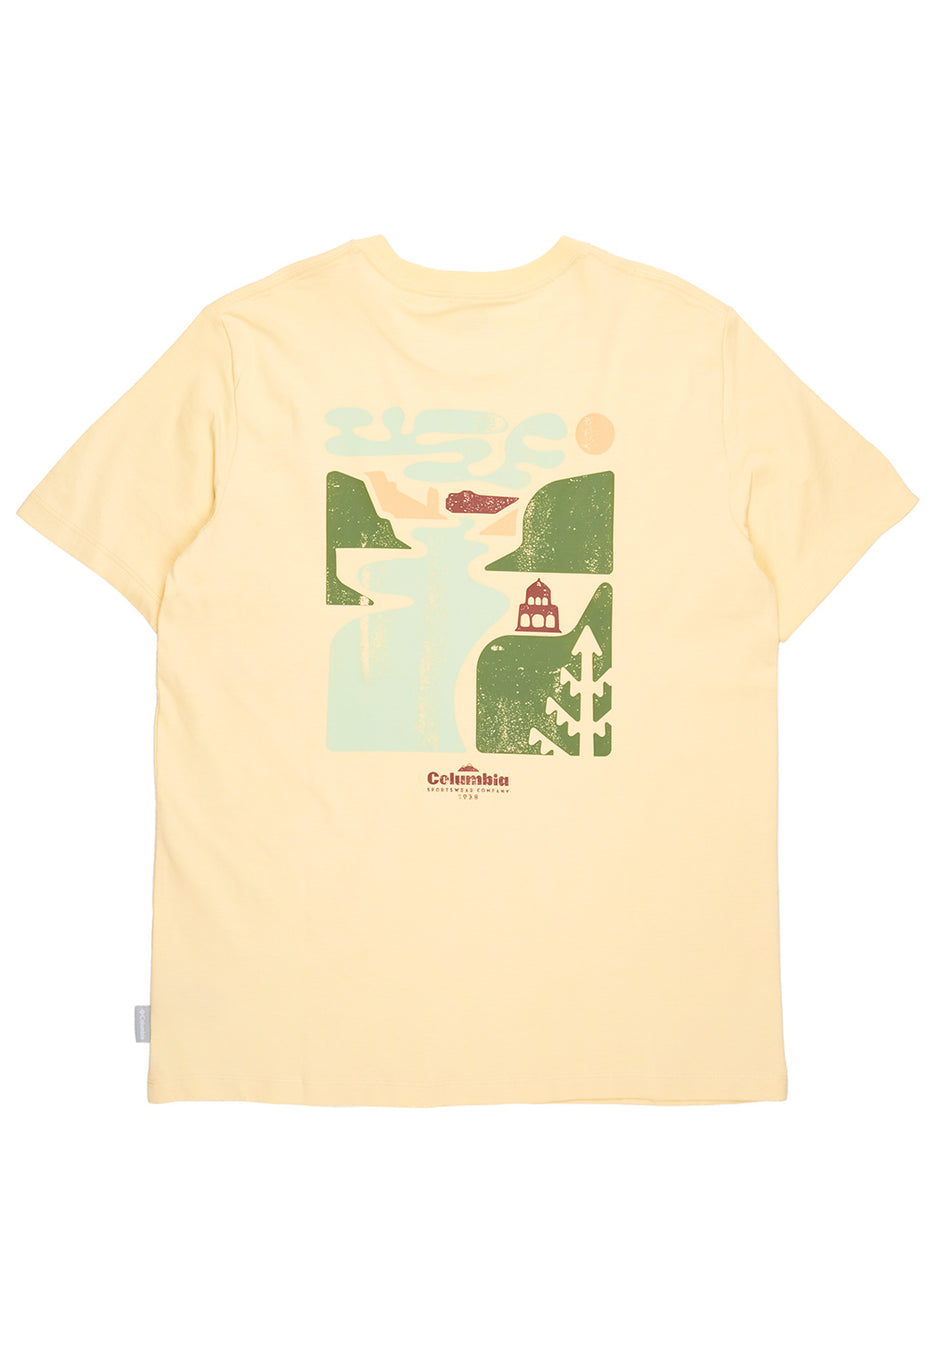 Columbia Women's Boundless Beauty Logo Tee - Sunkissed